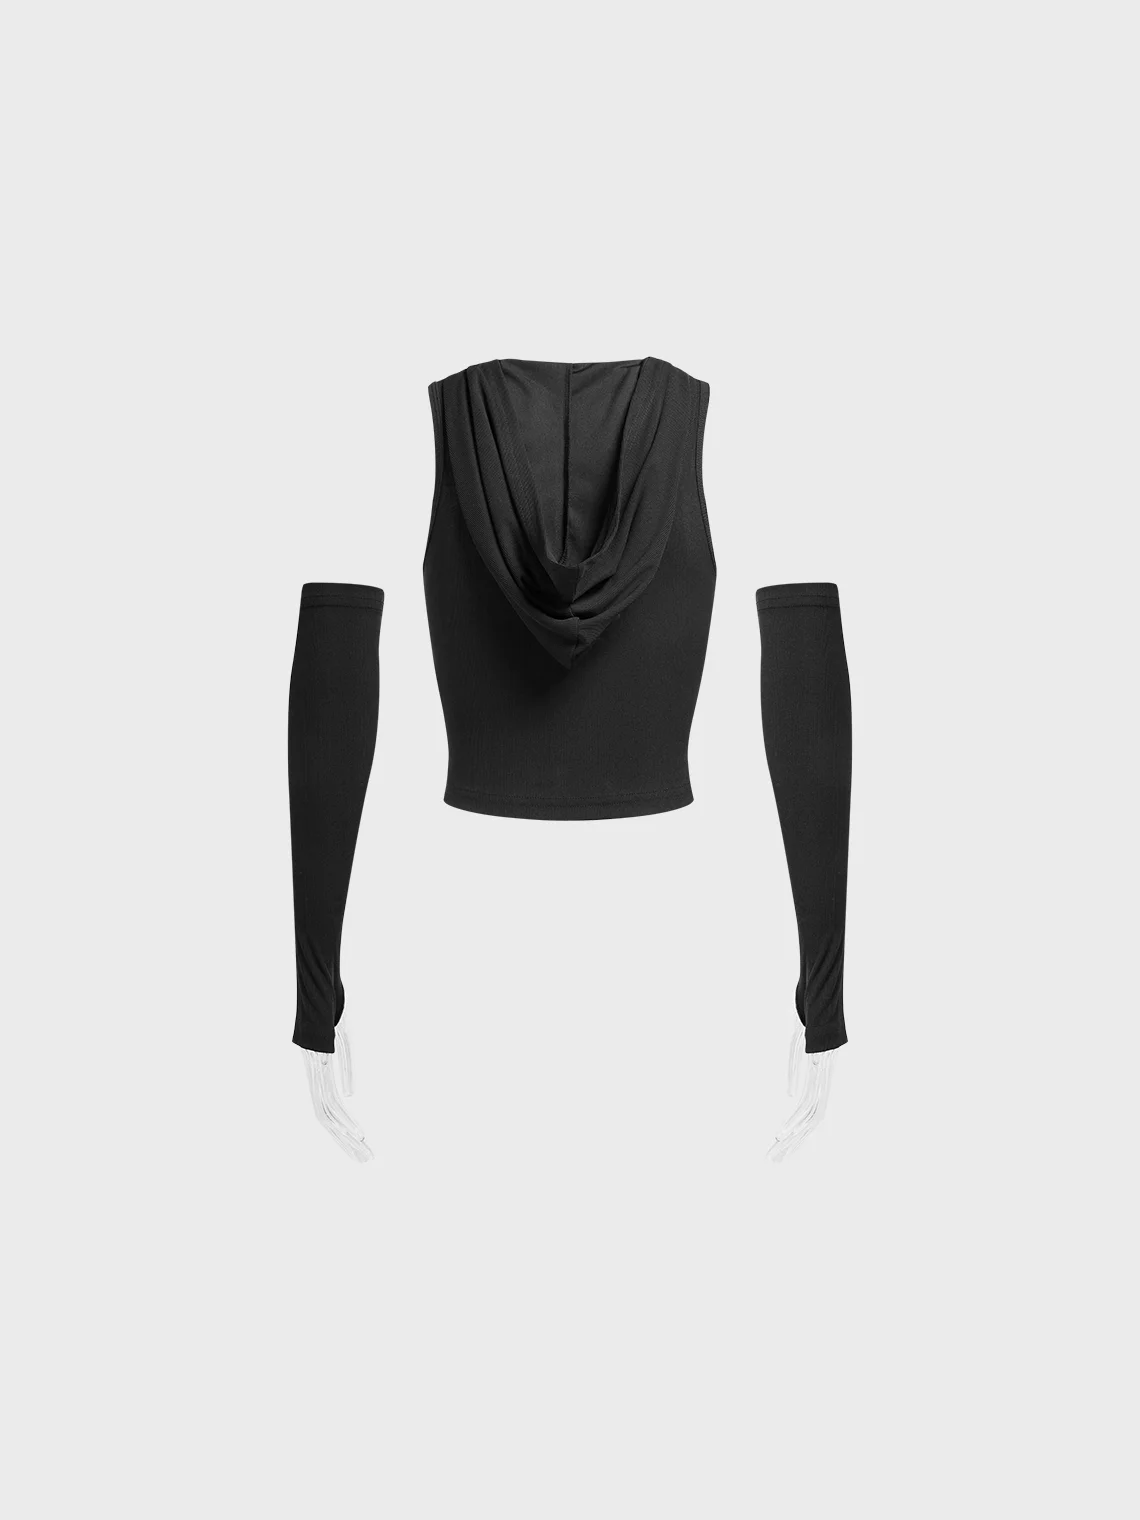 Cut Out Hooded Plain Tank Top